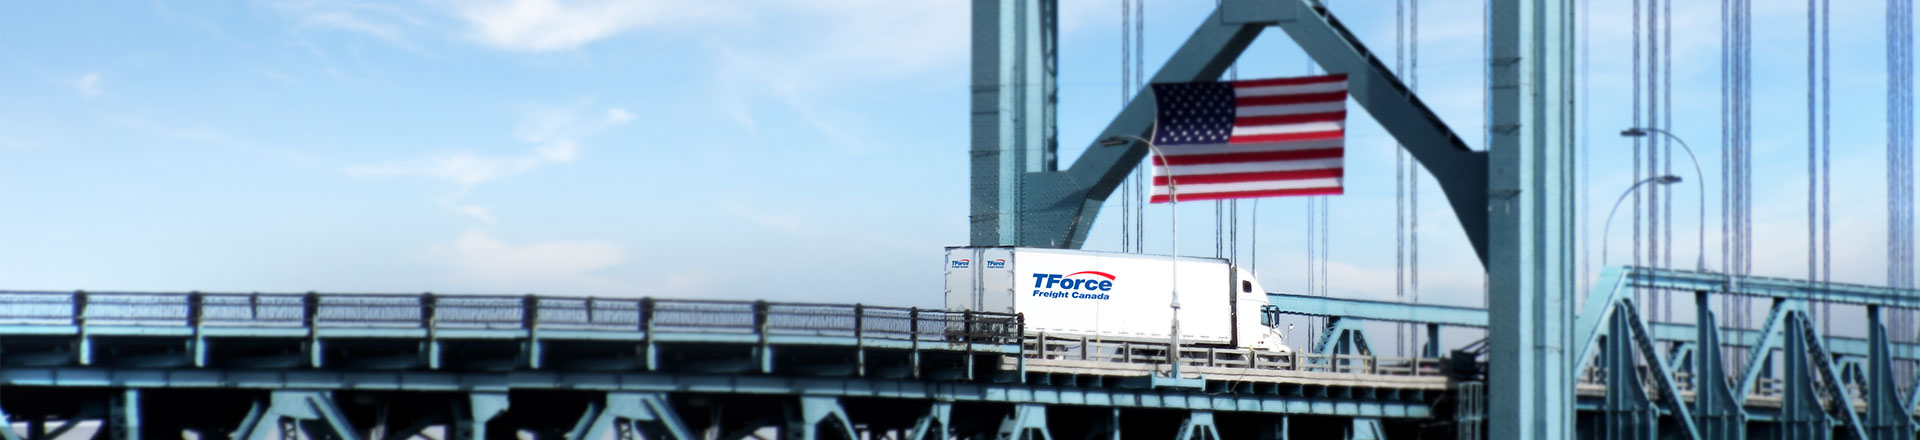 TForce Freight Canada semi-trailer driving into the USA from Canada carrying LTL shipment